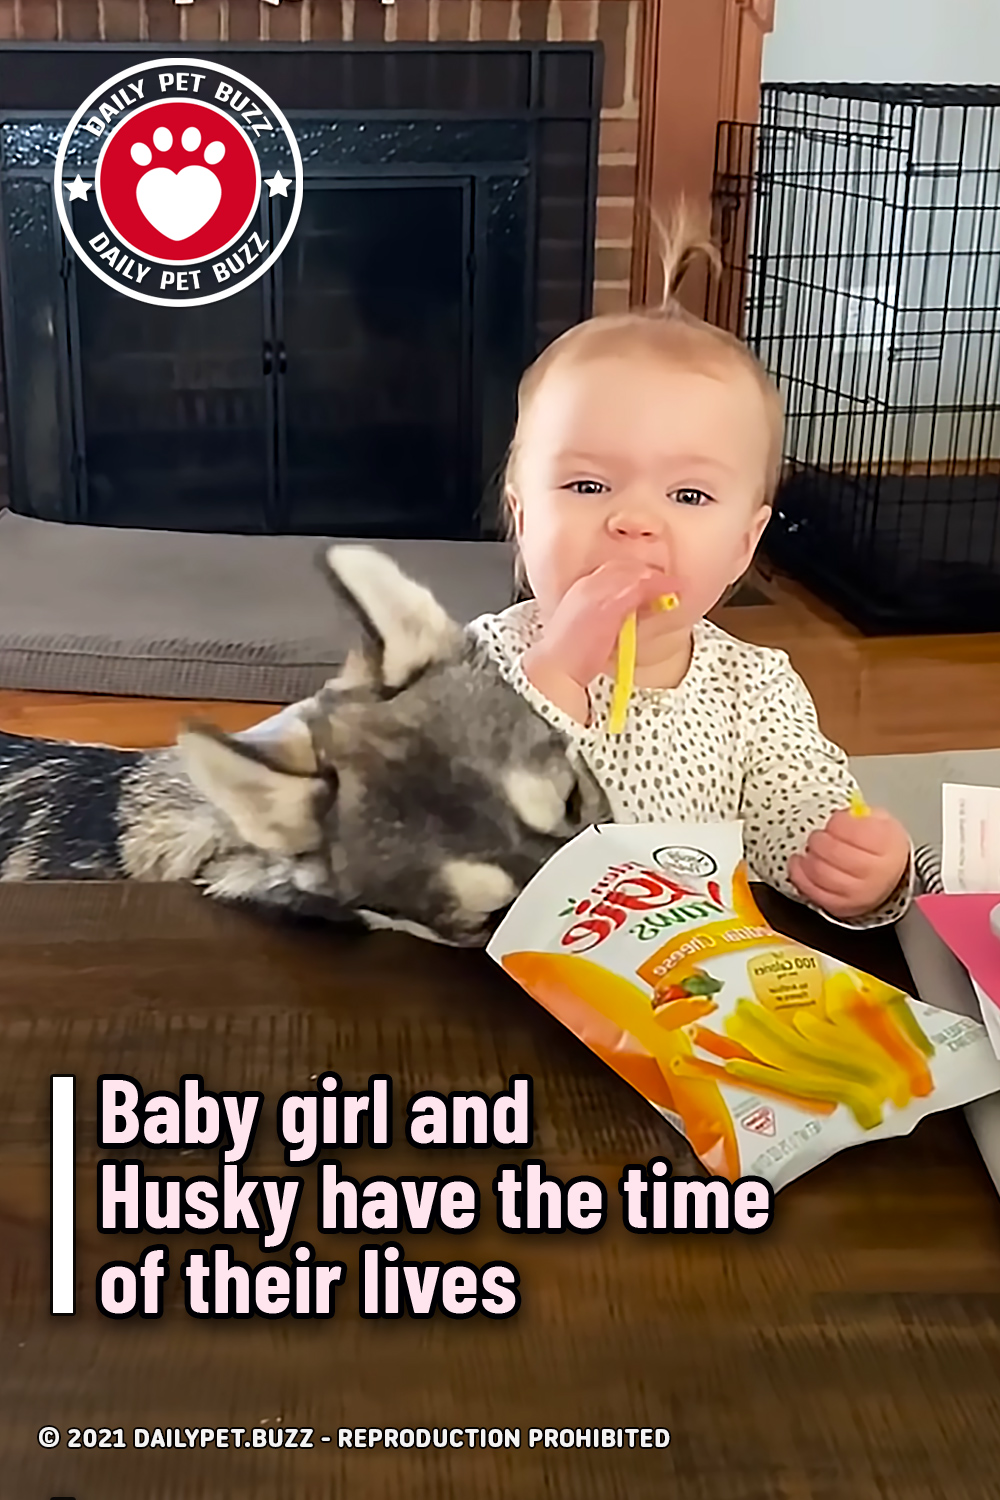 Baby girl and Husky have the time of their lives